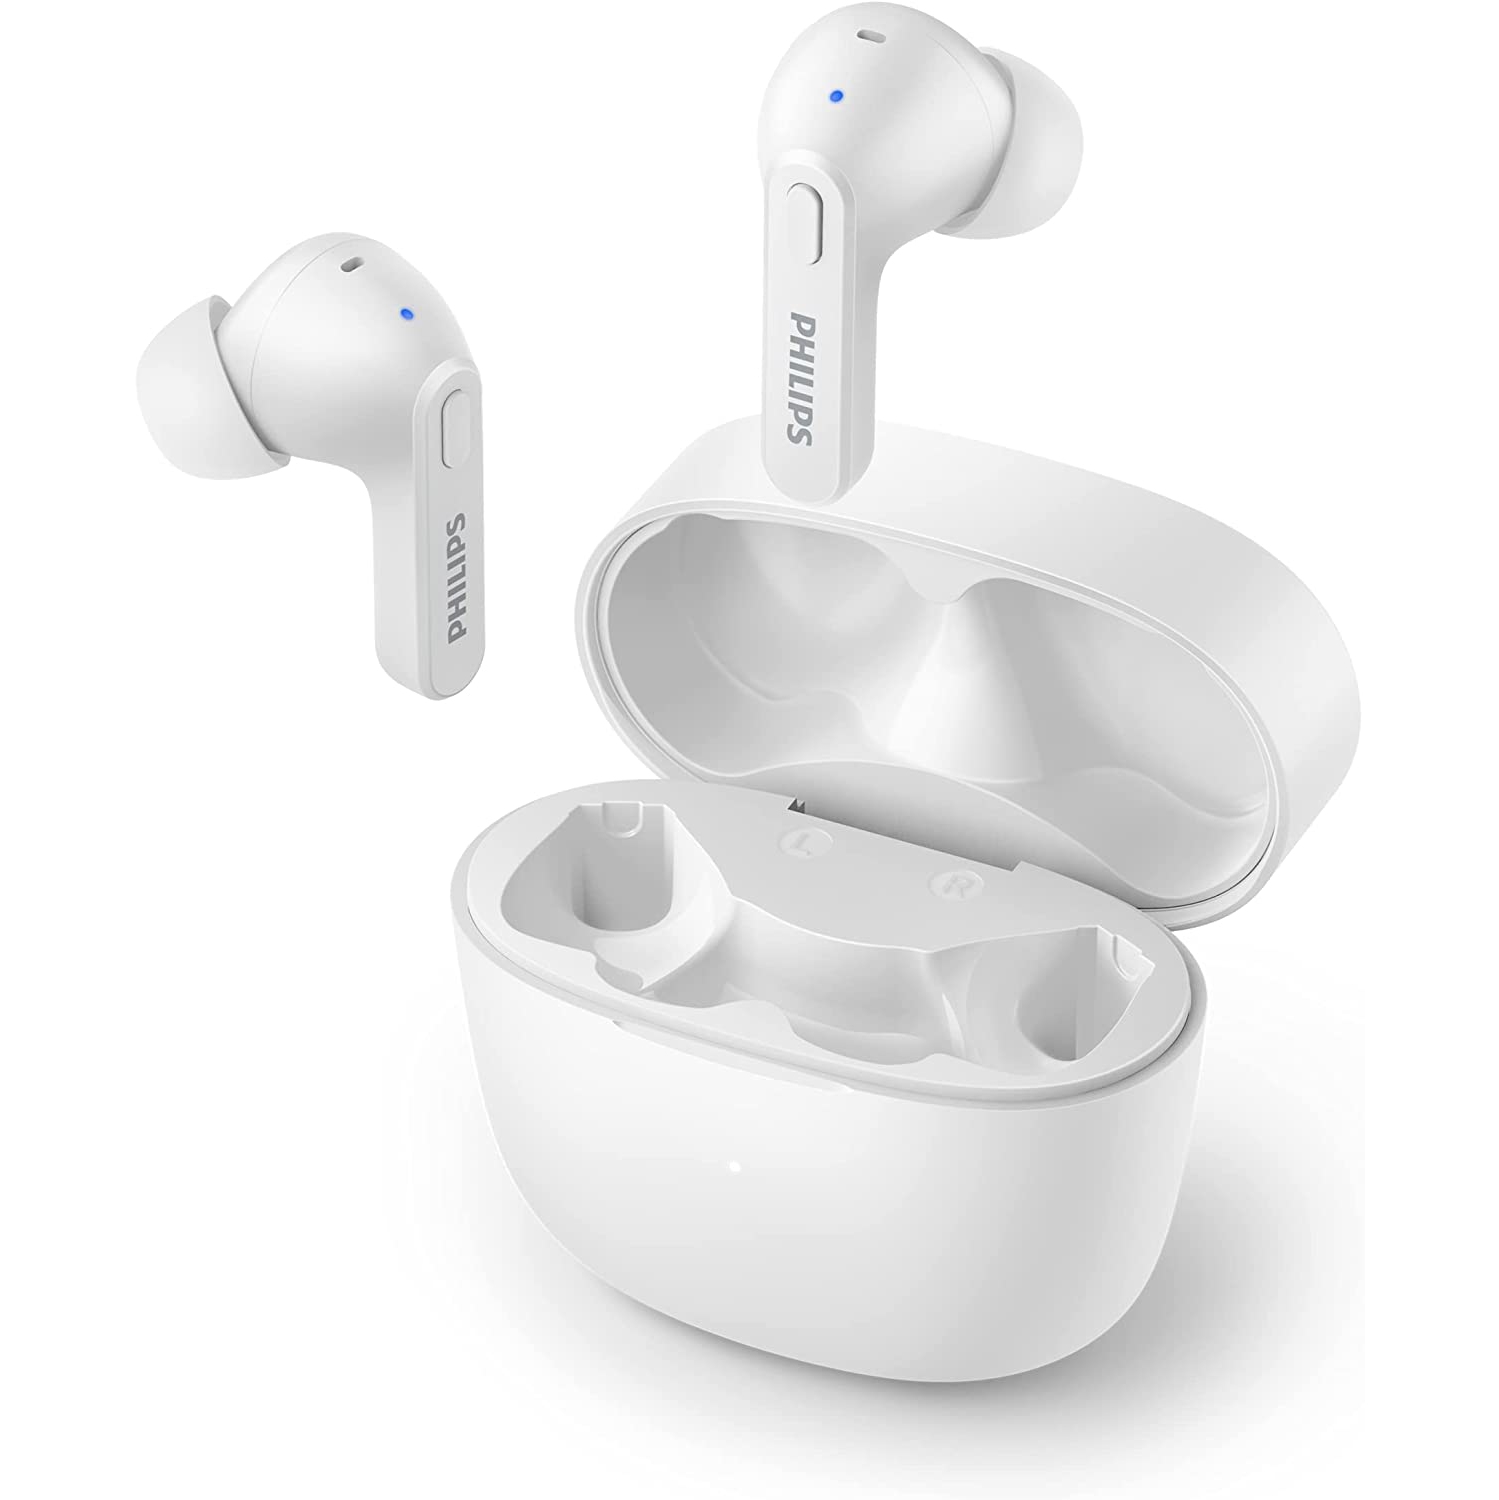 Philips T2206 True Wireless Headphones with IPX4 Water Resistance, Super-Small Charging case, Integrated Controls, Built-in Microphone, Up to 18 Hours Playtime, TAT2206WT - White